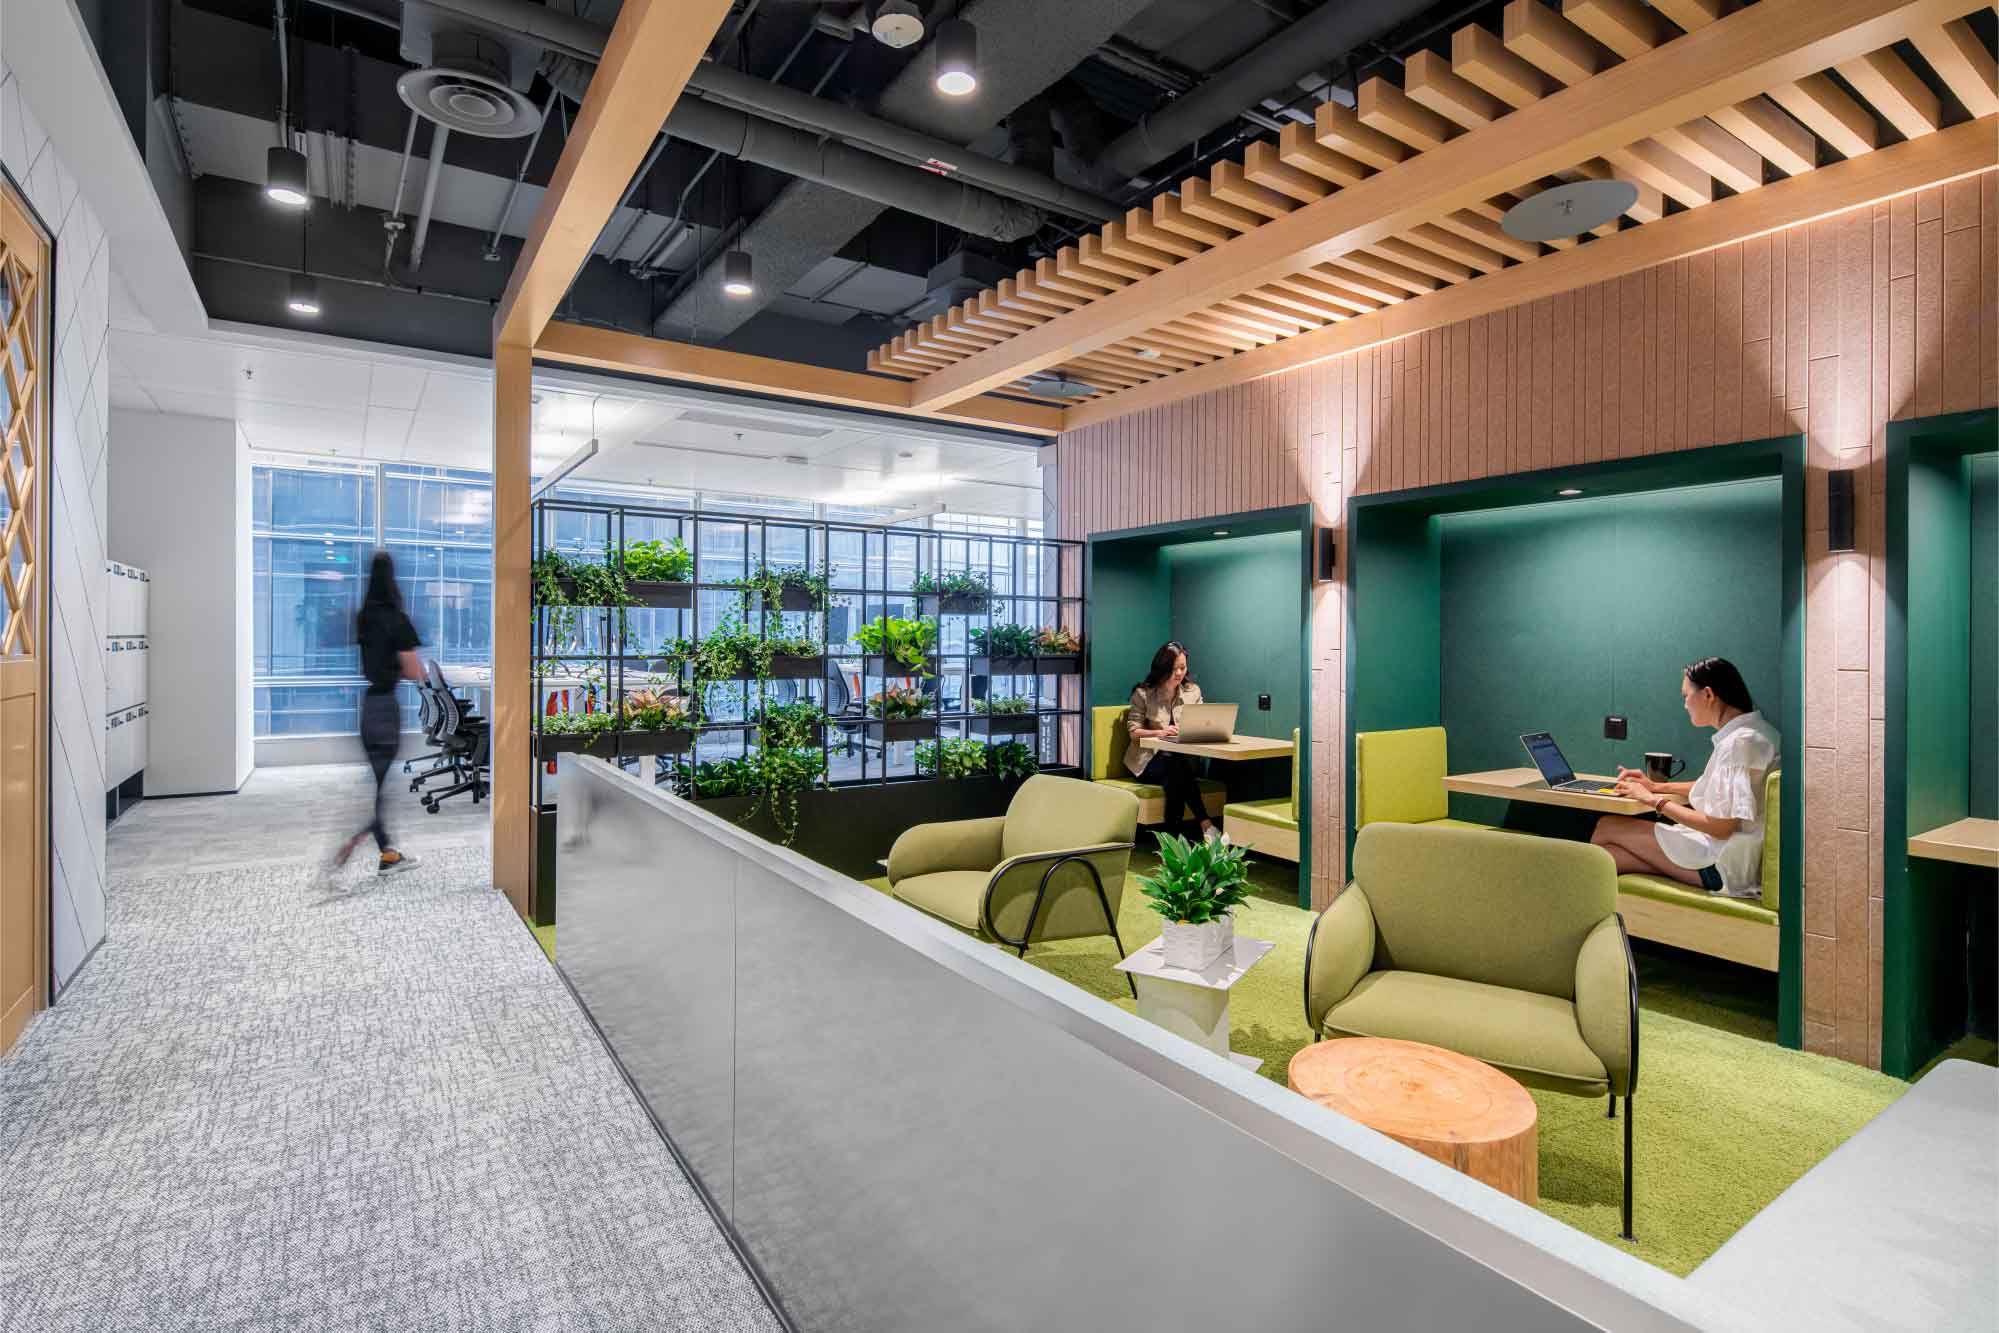 Airbnb’s Beijing office - Reinforcing brand equity